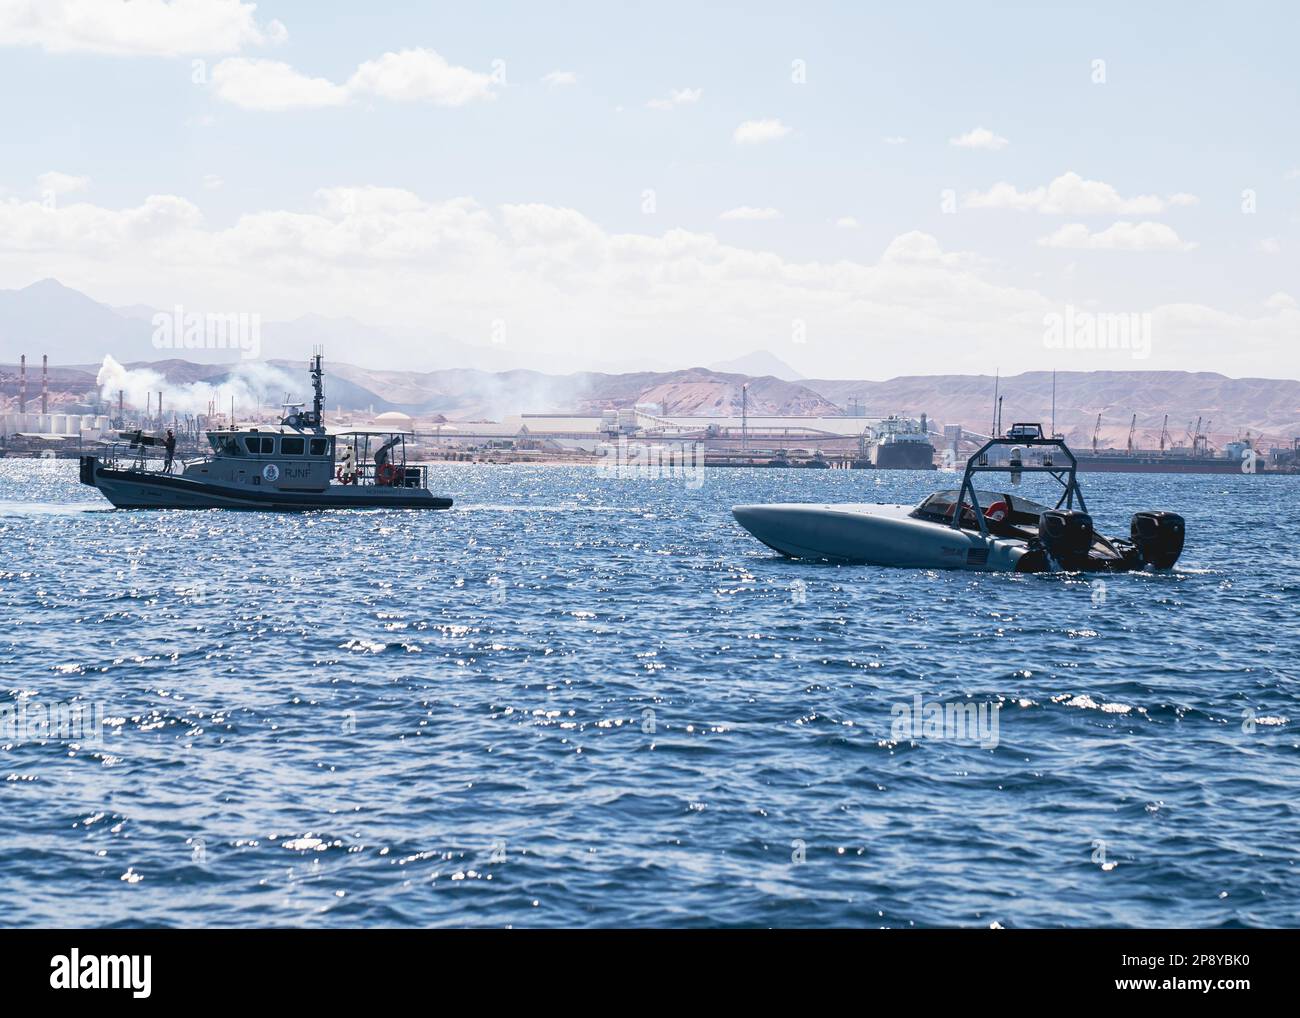 230308-A-NR779-1016 GULF OF AQABA (March 8, 2023) A MARTAC T-38 Devil Ray unmanned surface vessel operates alongside a Royal Jordanian Navy vessel in the Gulf of Aqaba, March 8, 2023, during International Maritime Exercise 2023. IMX/CE 2023 is the largest multinational training event in the Middle East, involving 7,000 personnel from more than 50 nations and international organizations committed to preserving the rules-based international order and strengthening regional maritime security cooperation. (U.S. Army photo by Spc. Aaron Troutman) Stock Photo